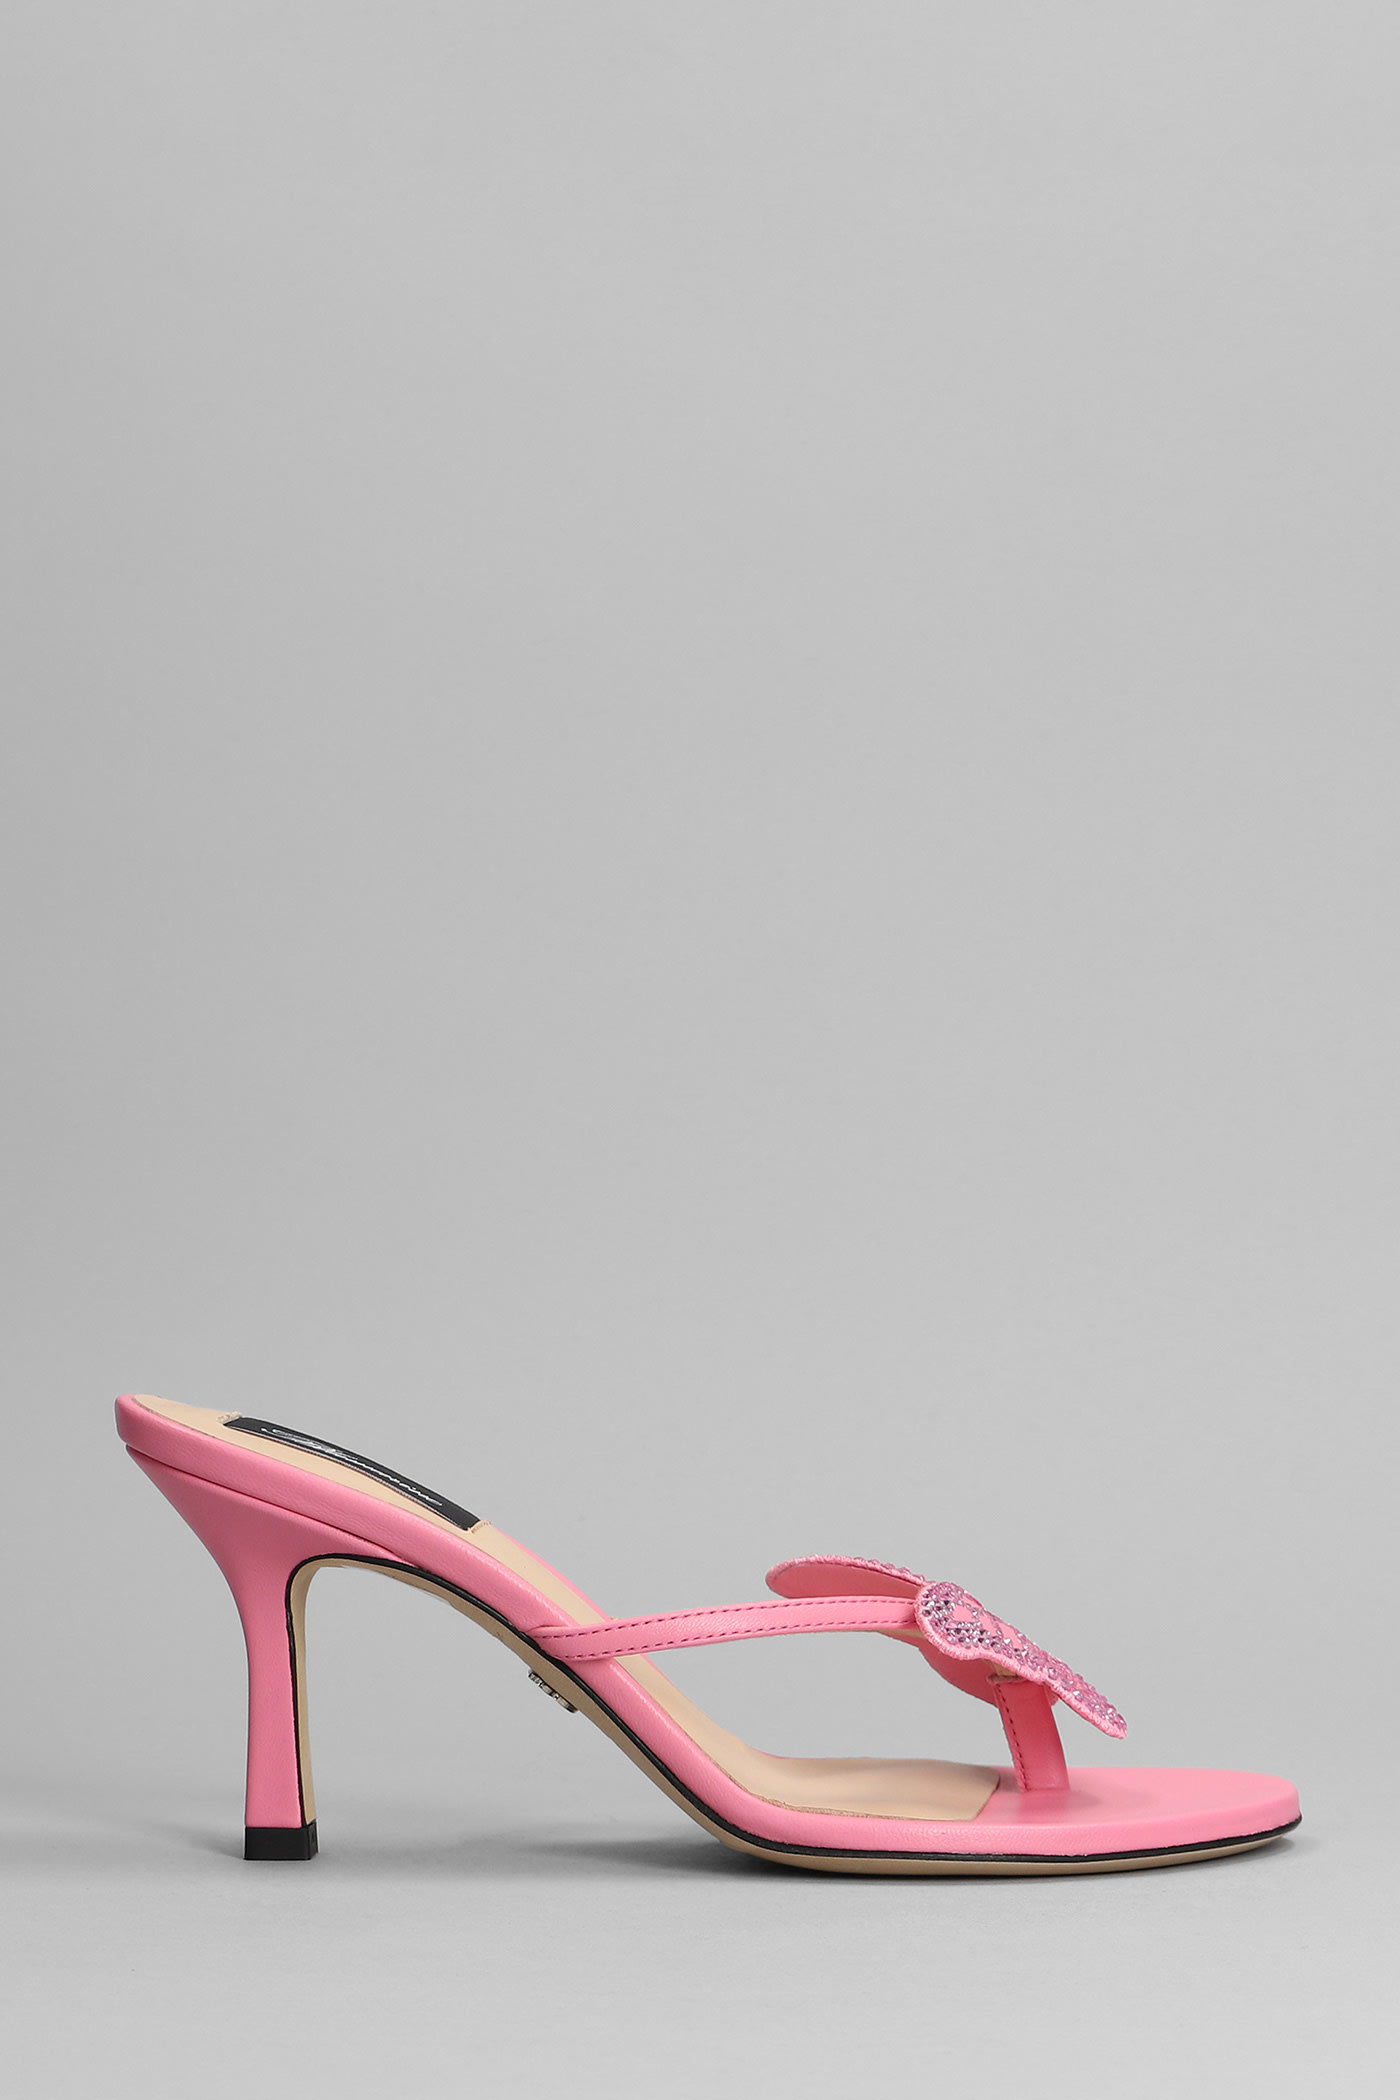 BLUMARINE SANDALS IN ROSE-PINK LEATHER